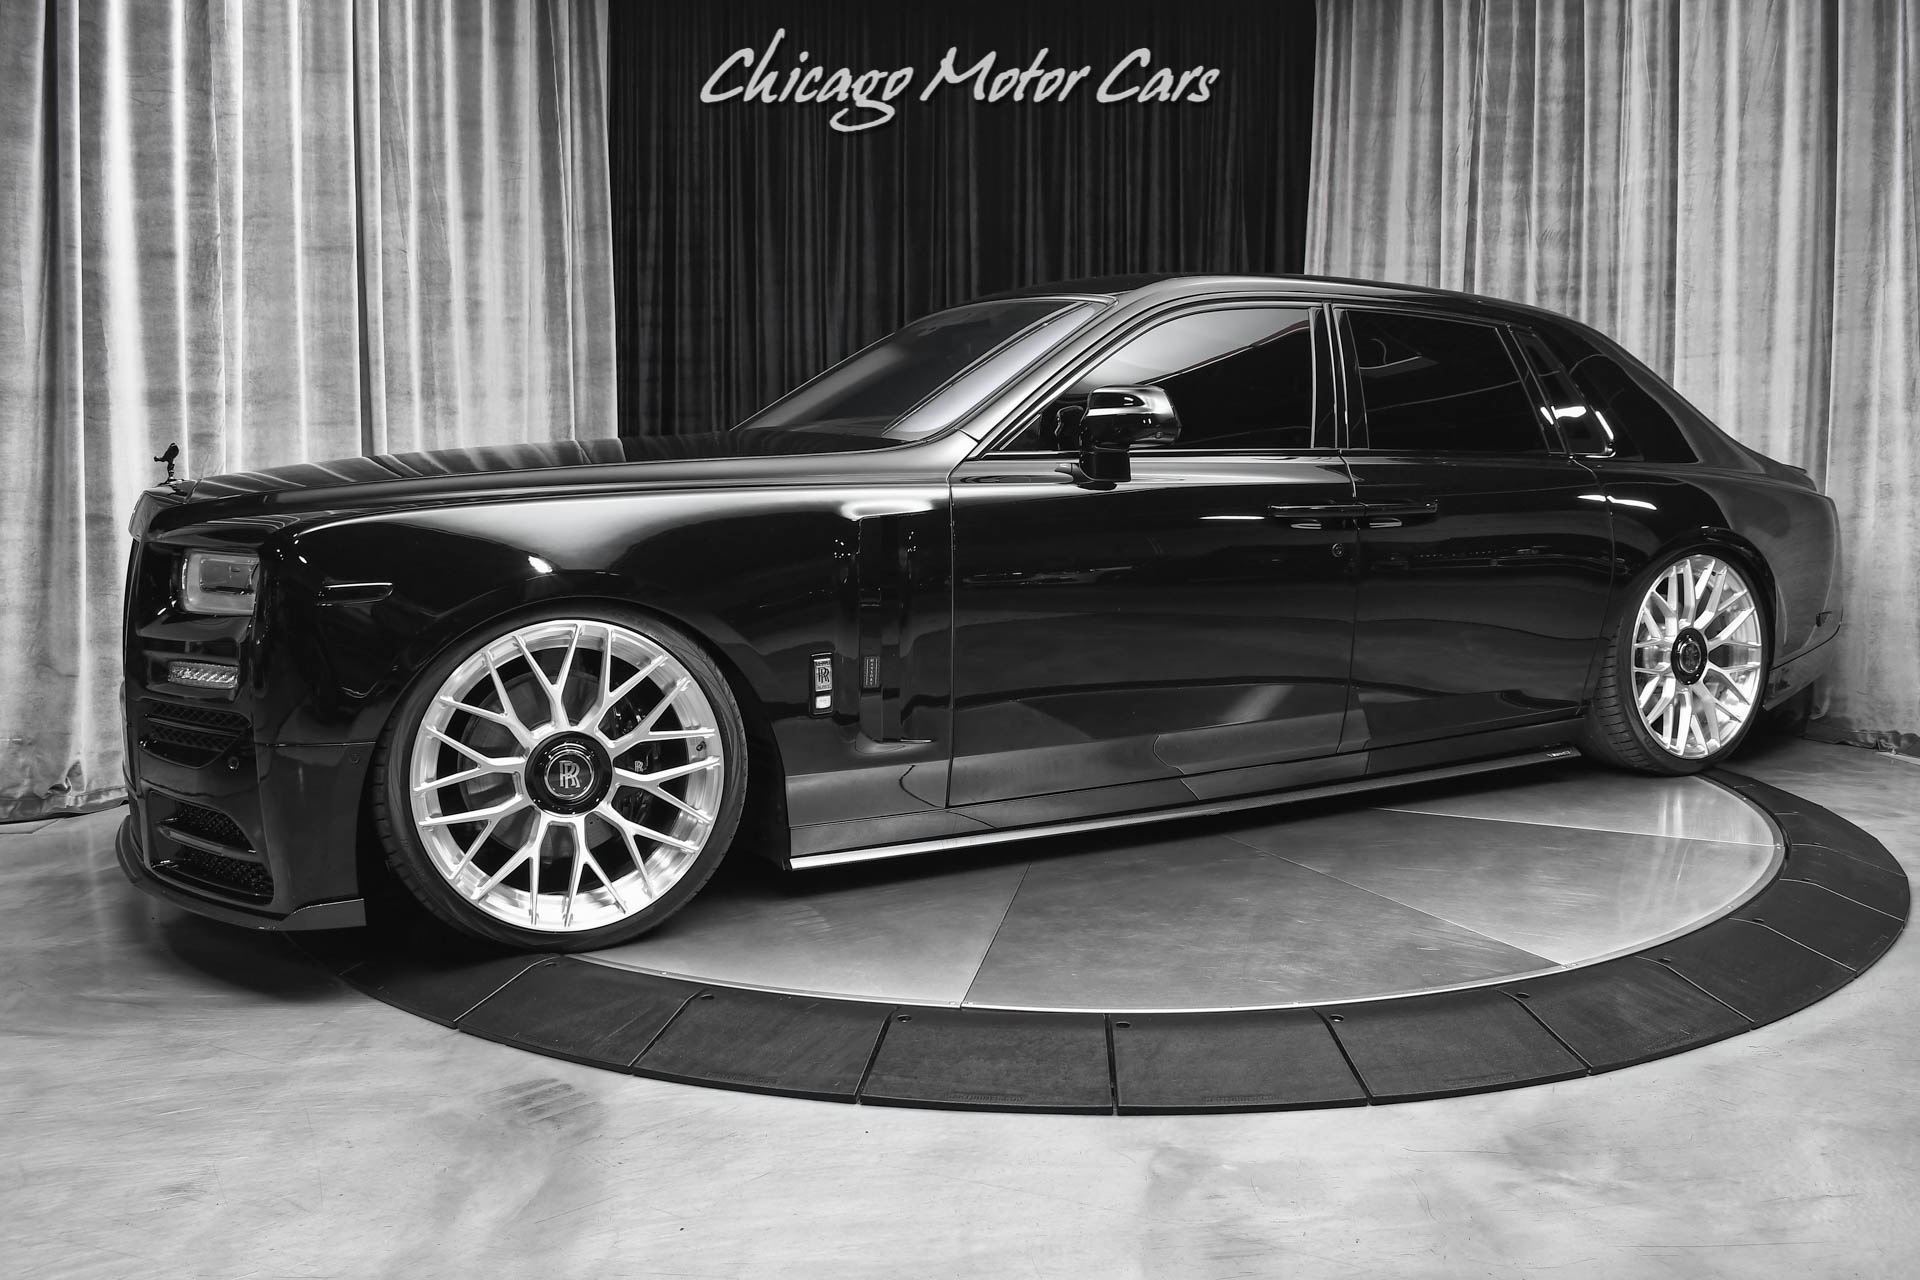 You won't believe the price of this Rolls-Royce Phantom by Mansory